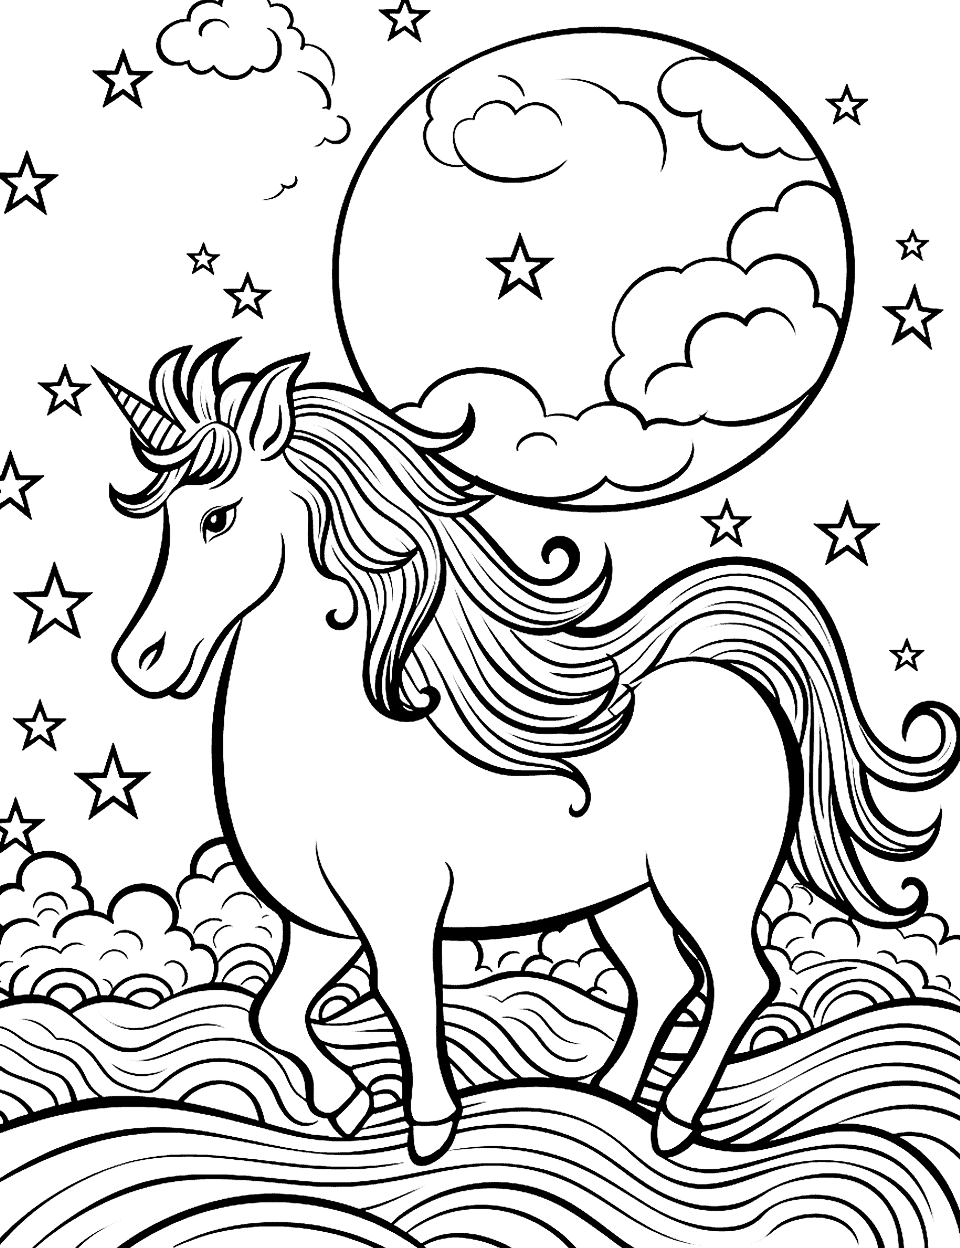 Cloud Nine Unicorn Coloring Page - A celestial scene featuring a unicorn on the cloud, surrounded by stars and galaxies.